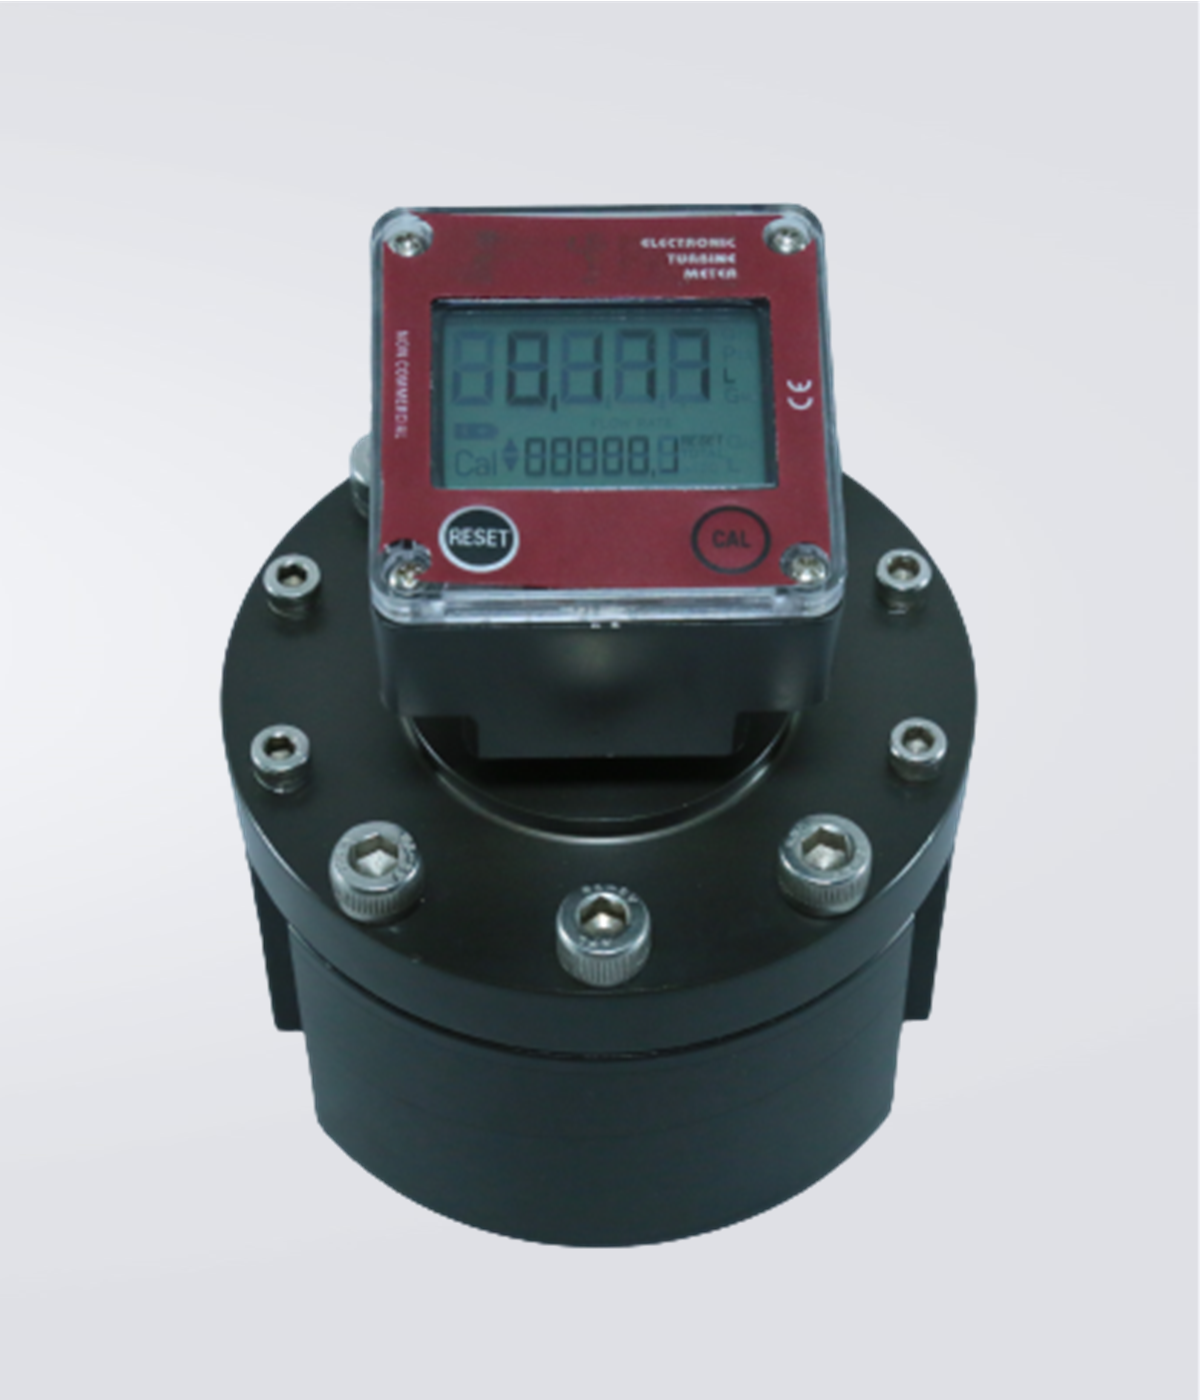 Oval Gear Flow Meter with Battery operated Display